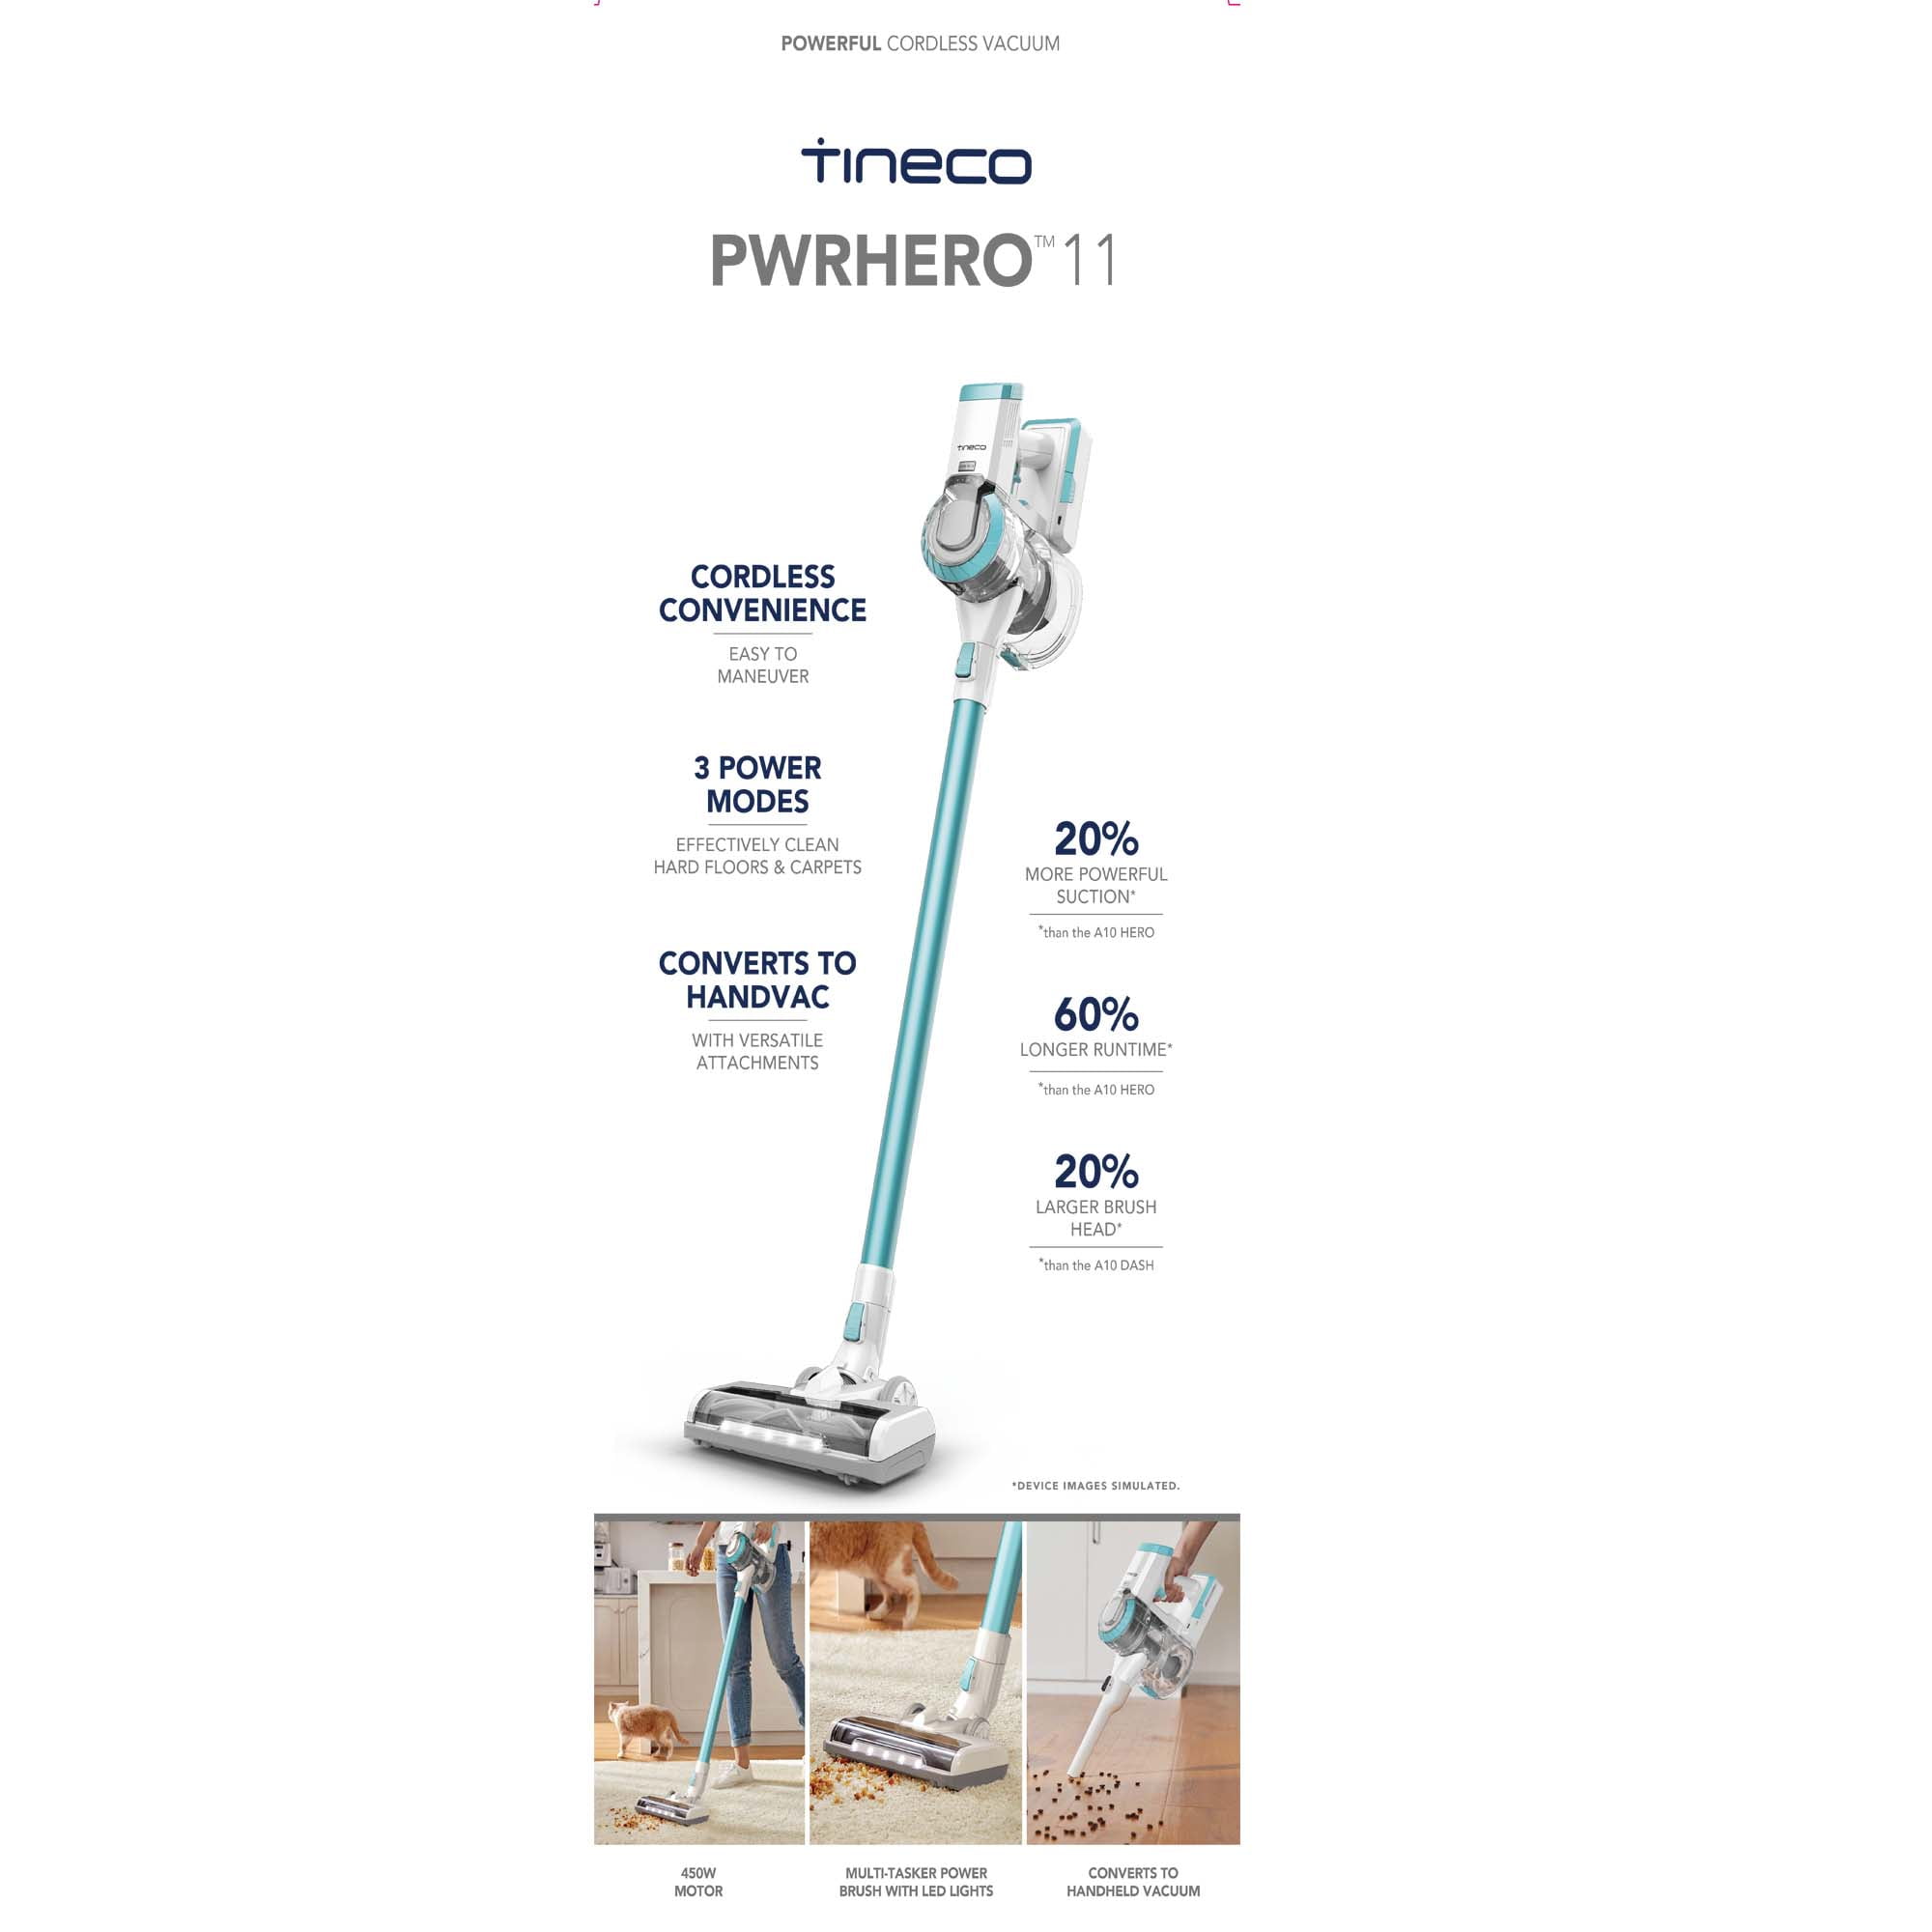 Hard Hair with Lightweight PWRHERO Tineco Surfaces Carpet, Powerful Suction Vacuum and Stick 11 Pet Cordless Cleaner for